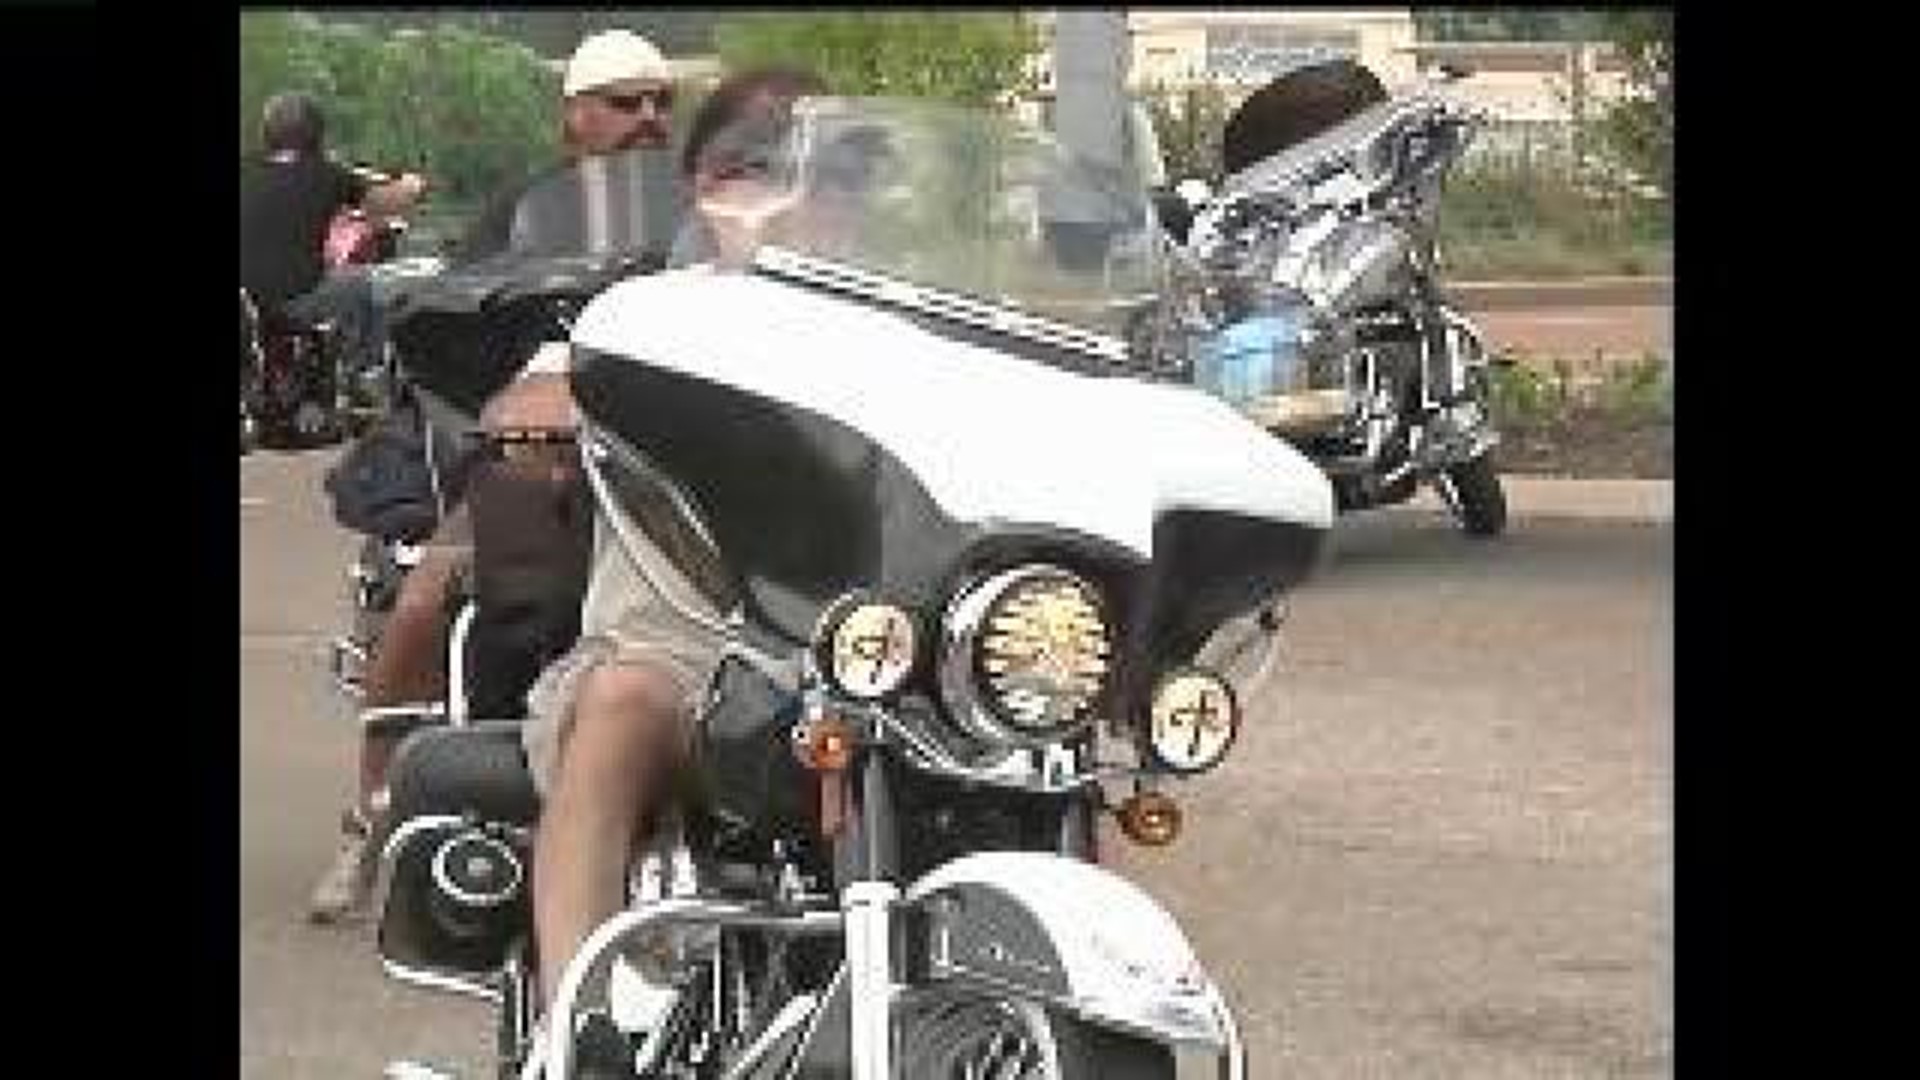 Hot Bikes coming to the Quad Cities